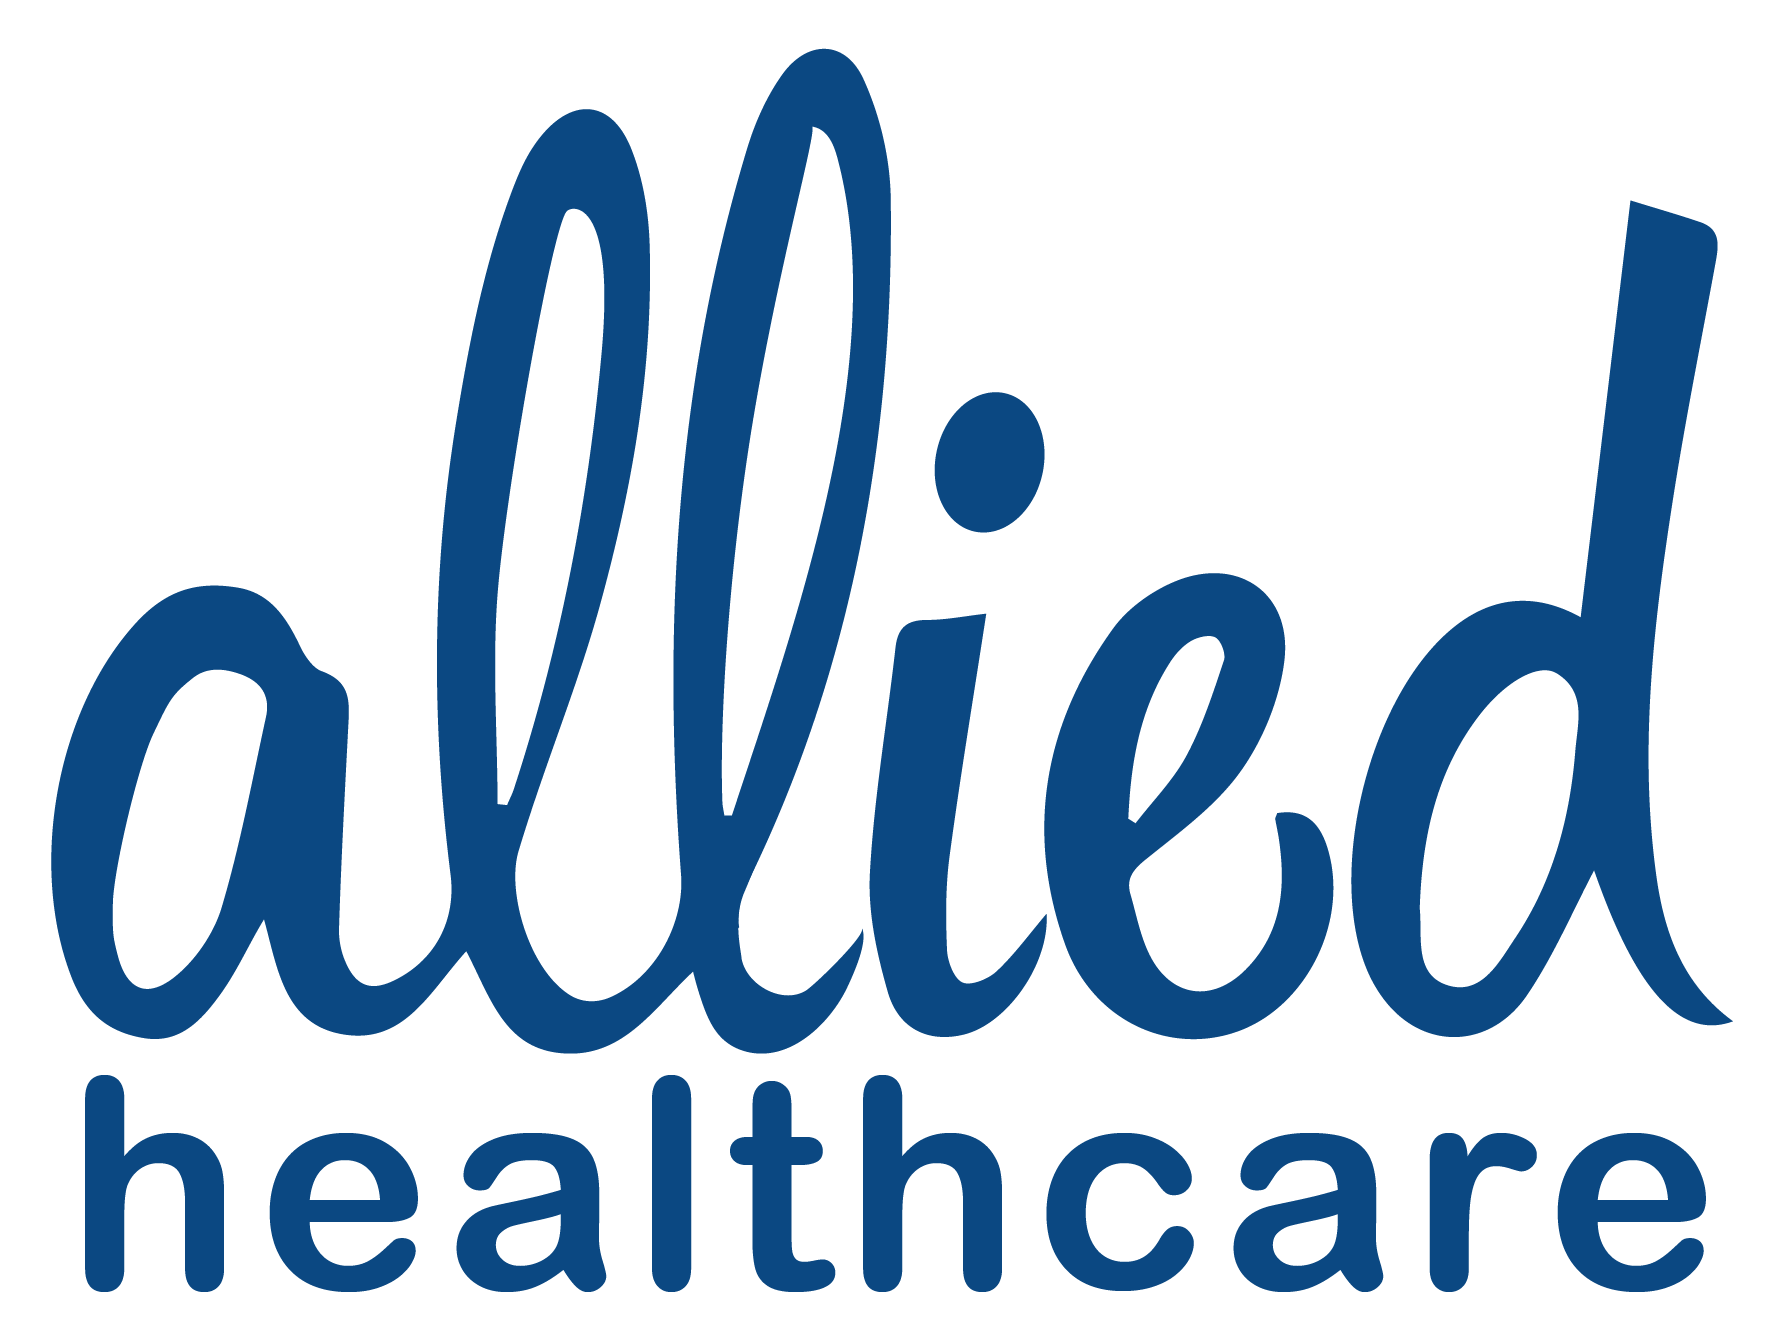 Supreme Healthcare Logo - Allied Healthcare | Care and support services to live your life ...